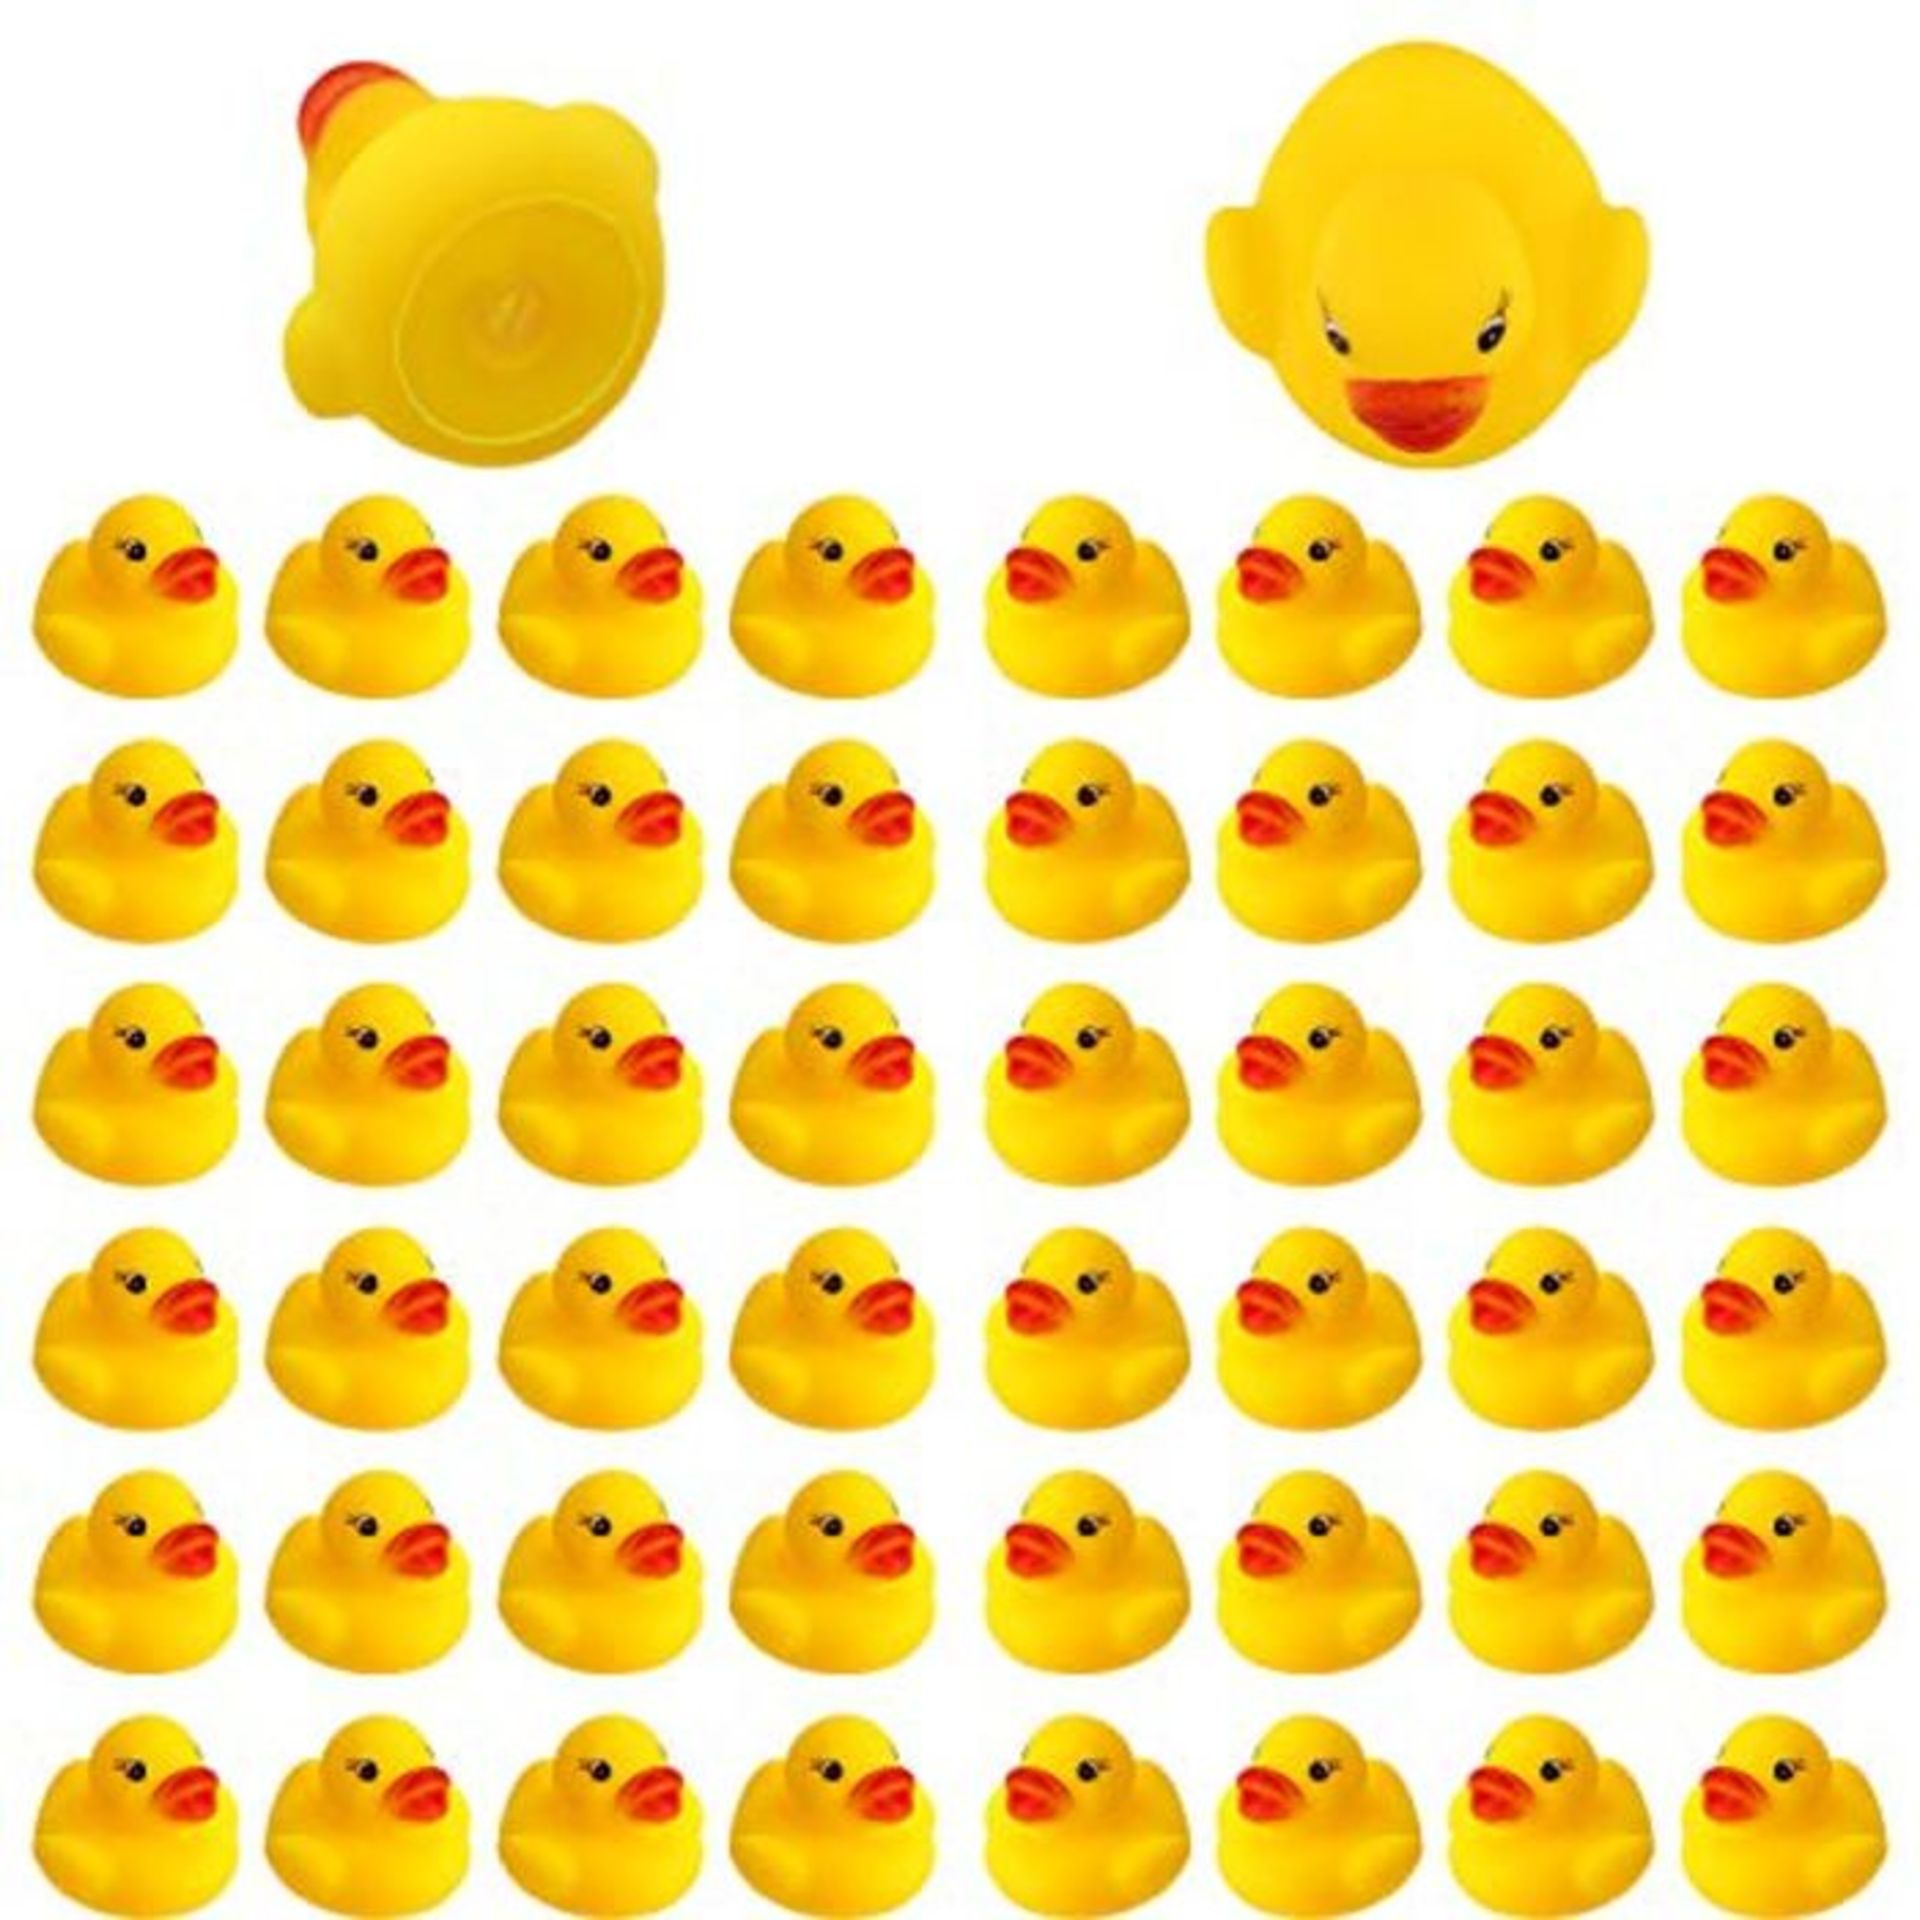 [INCOMPLETE] SAVITA 50pcs Rubber Ducky Bath Toy for Kids, Float and Squeak Mini Small